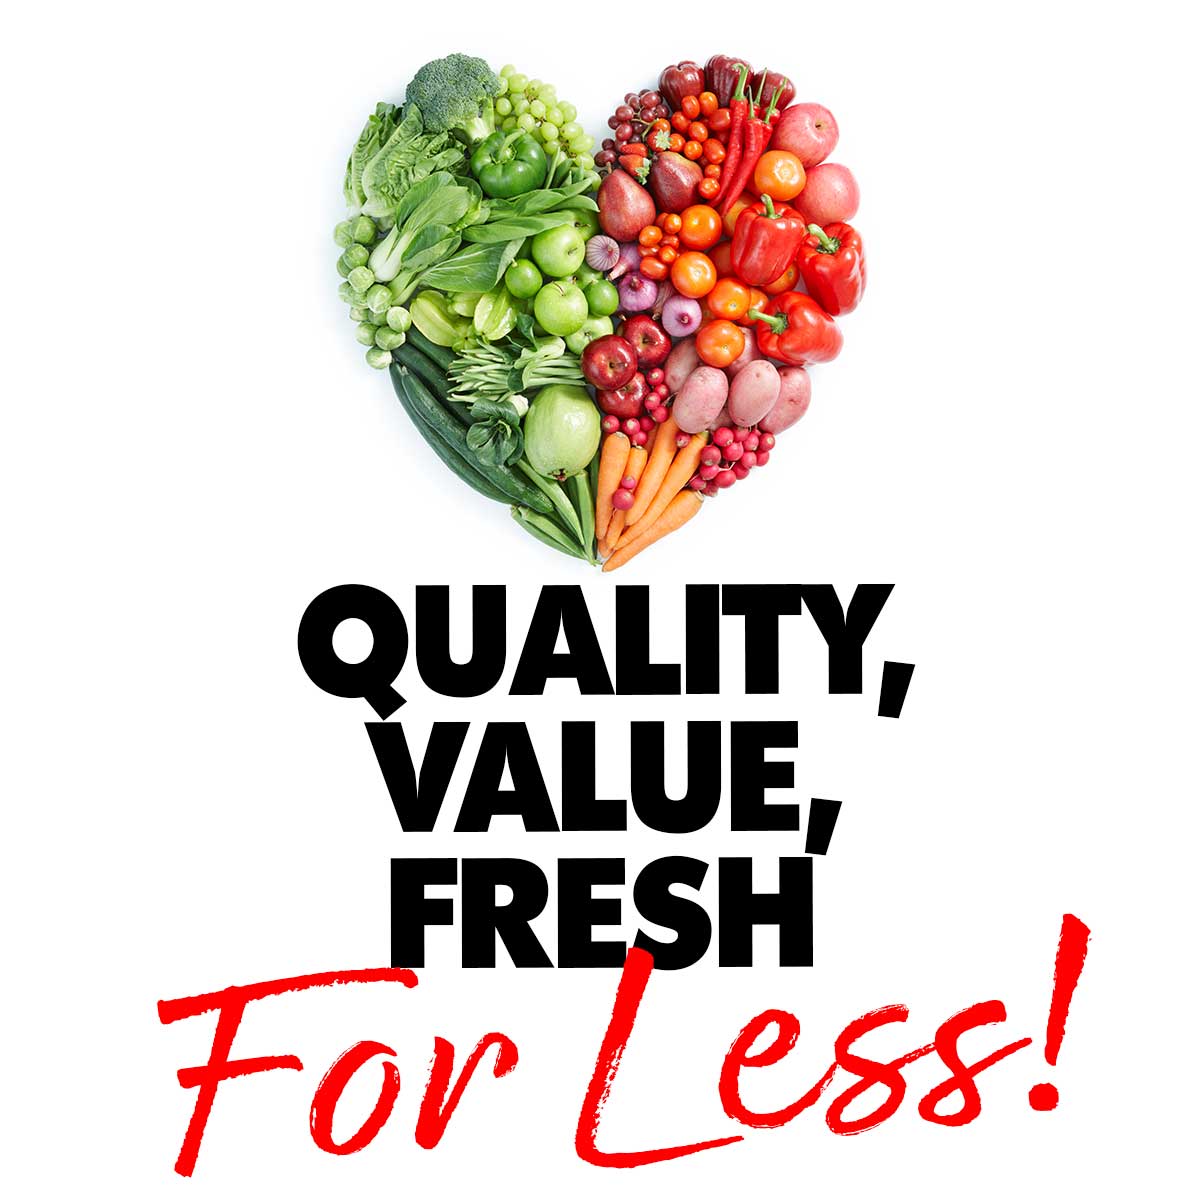 Quality,Value,Fresh-FOR LESS!